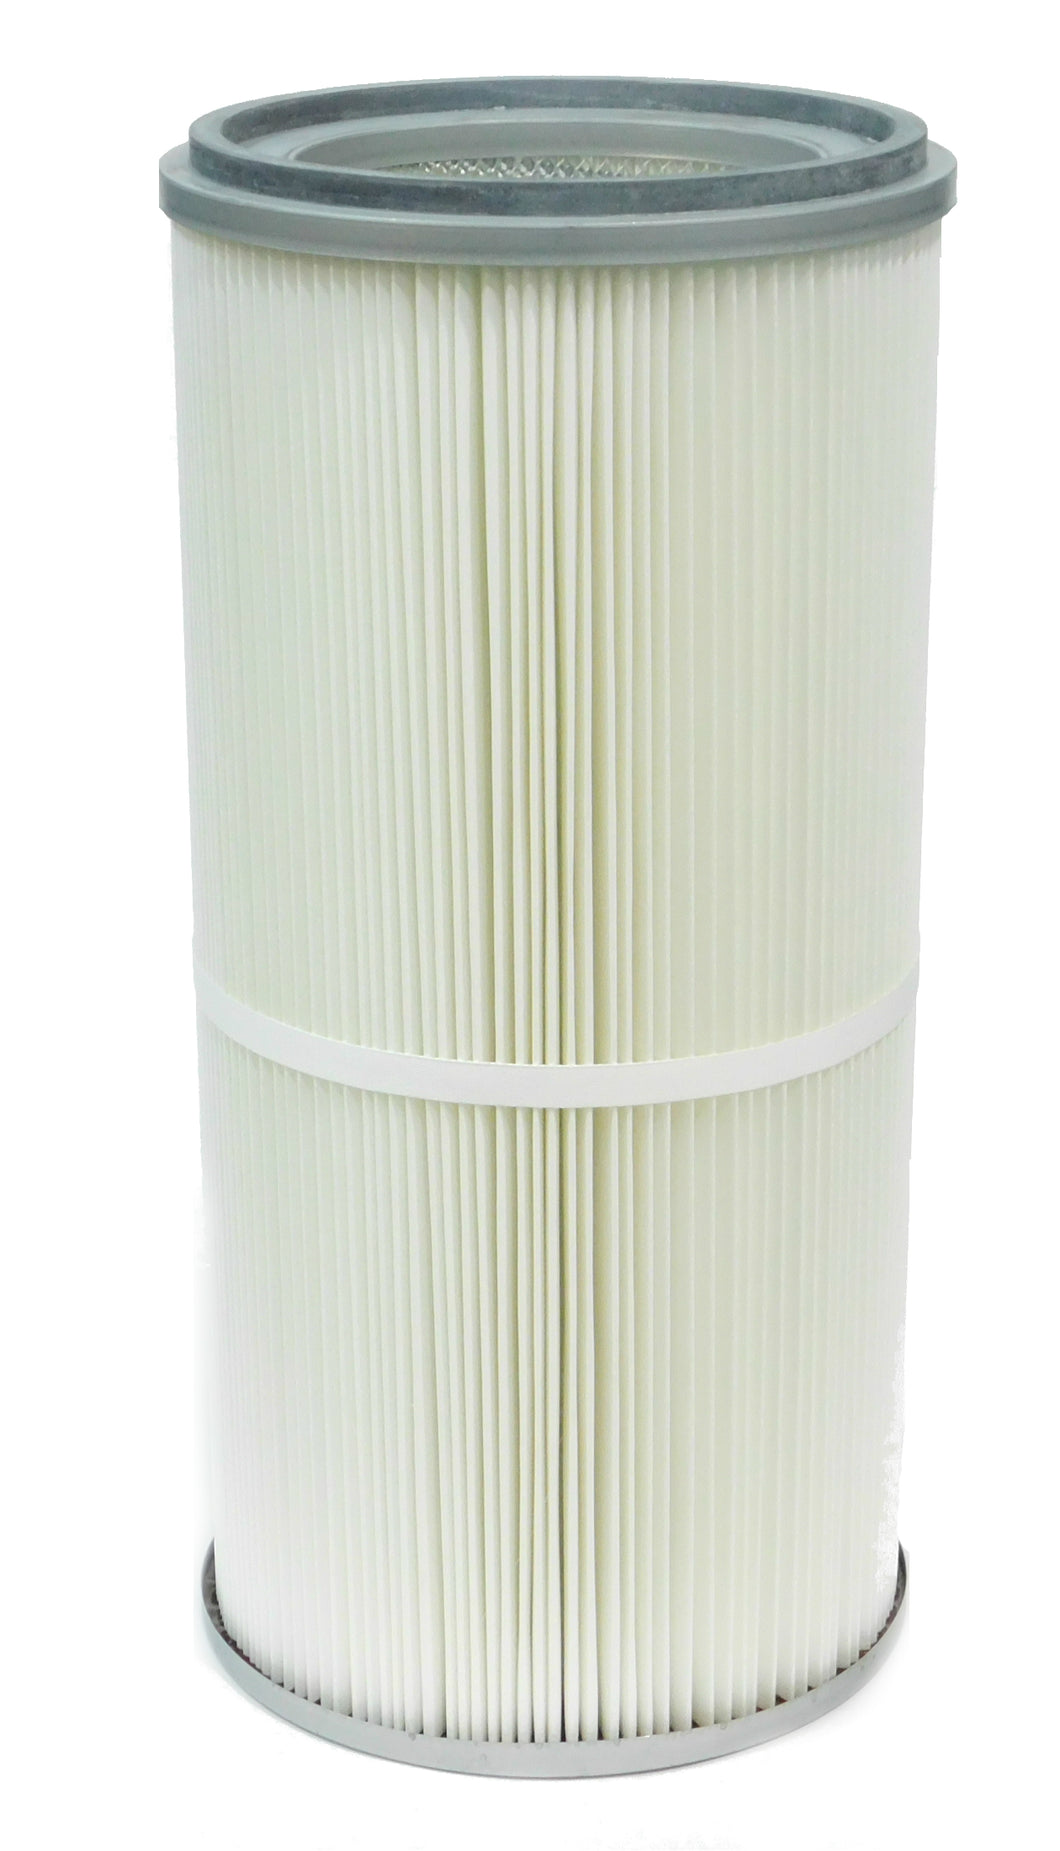 7219-03 - Aercology - OEM Replacement Filter